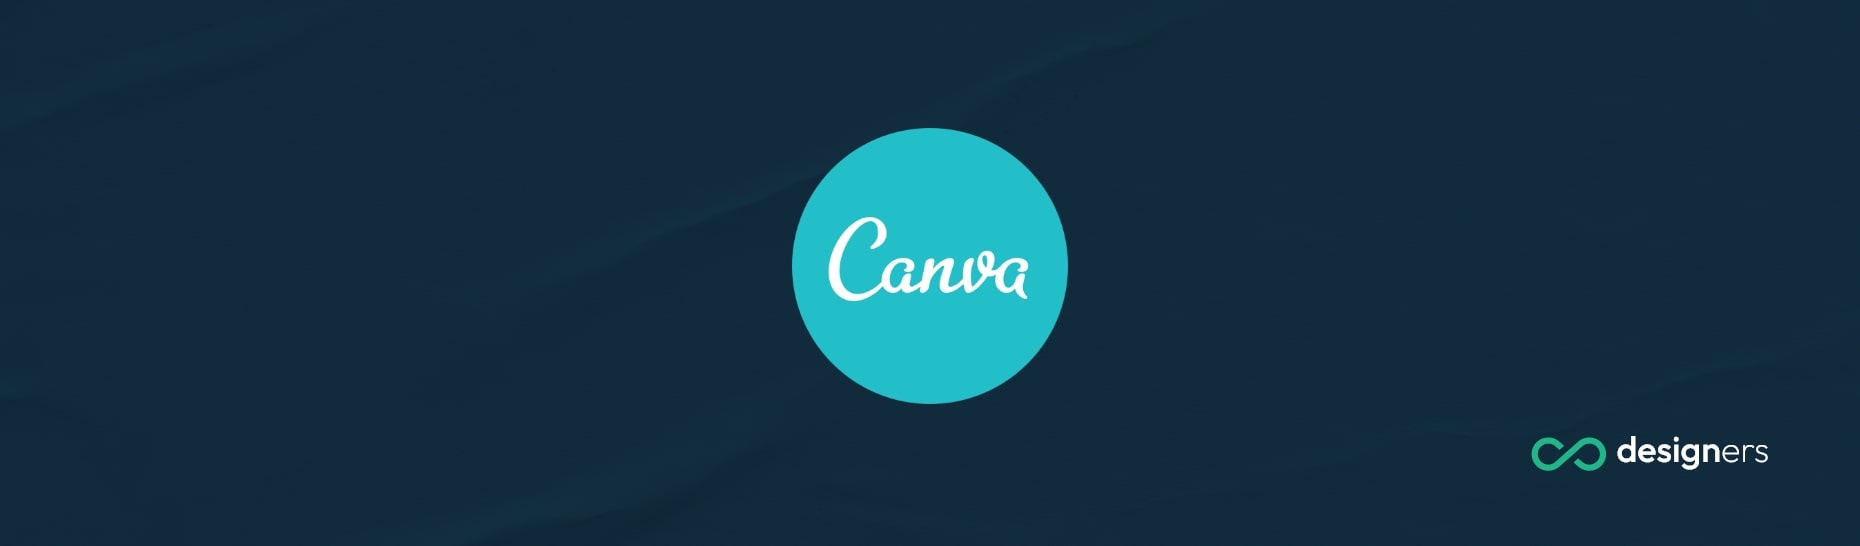 Why Is Canva Not Uploading My Video? 